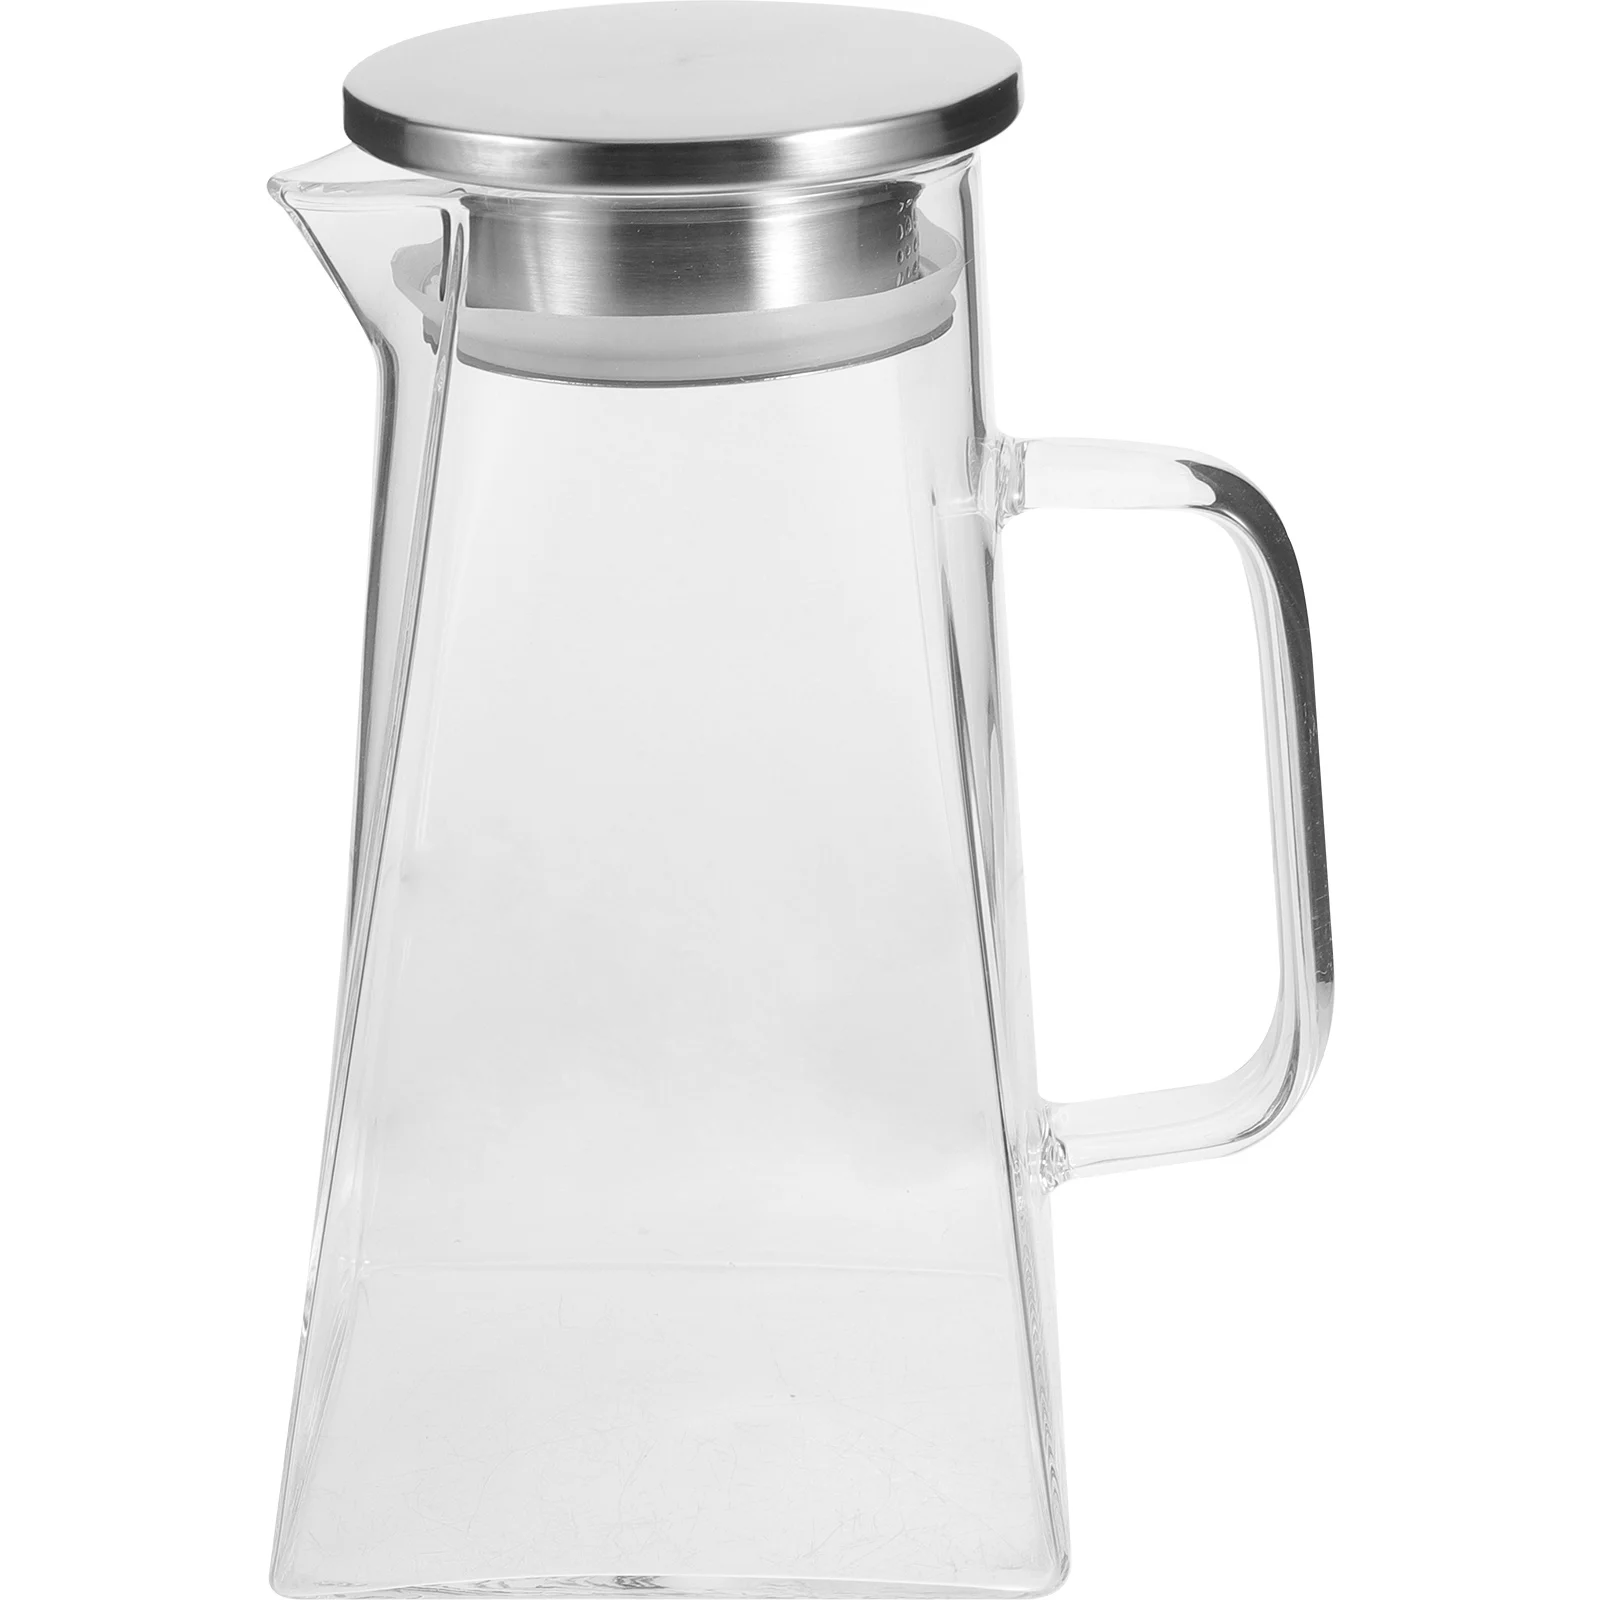 

Water Carafe Pitcher Tea Beverage Kettle Decanter Tumbler Night Bedside Maker Fridge Ice Dispensers Containers Juice Clear